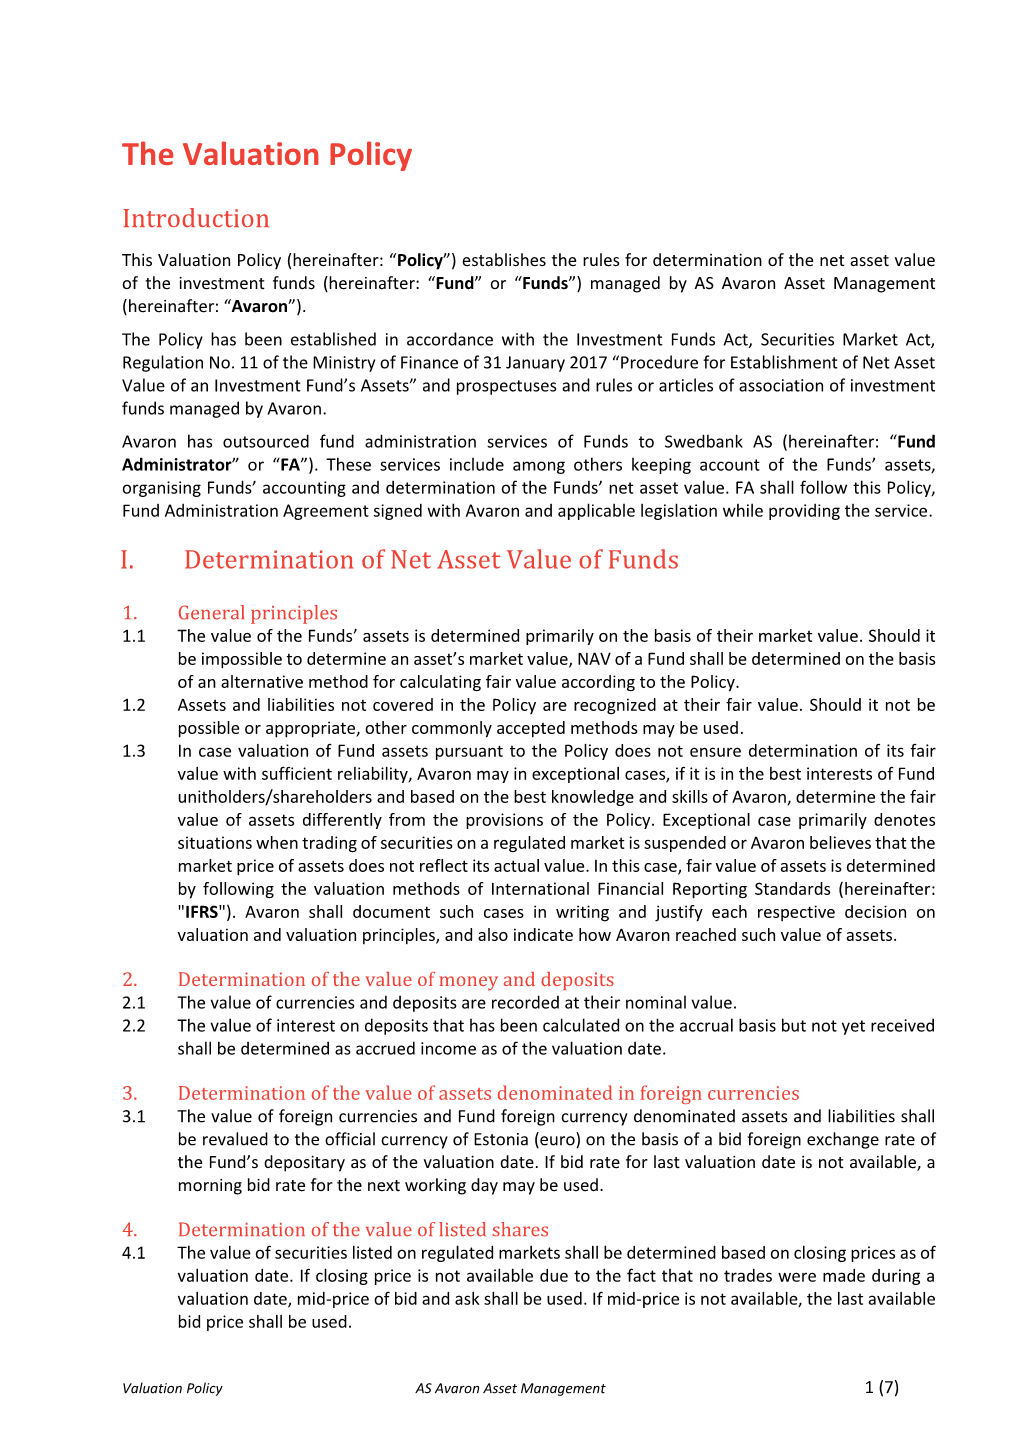 The Valuation Policy